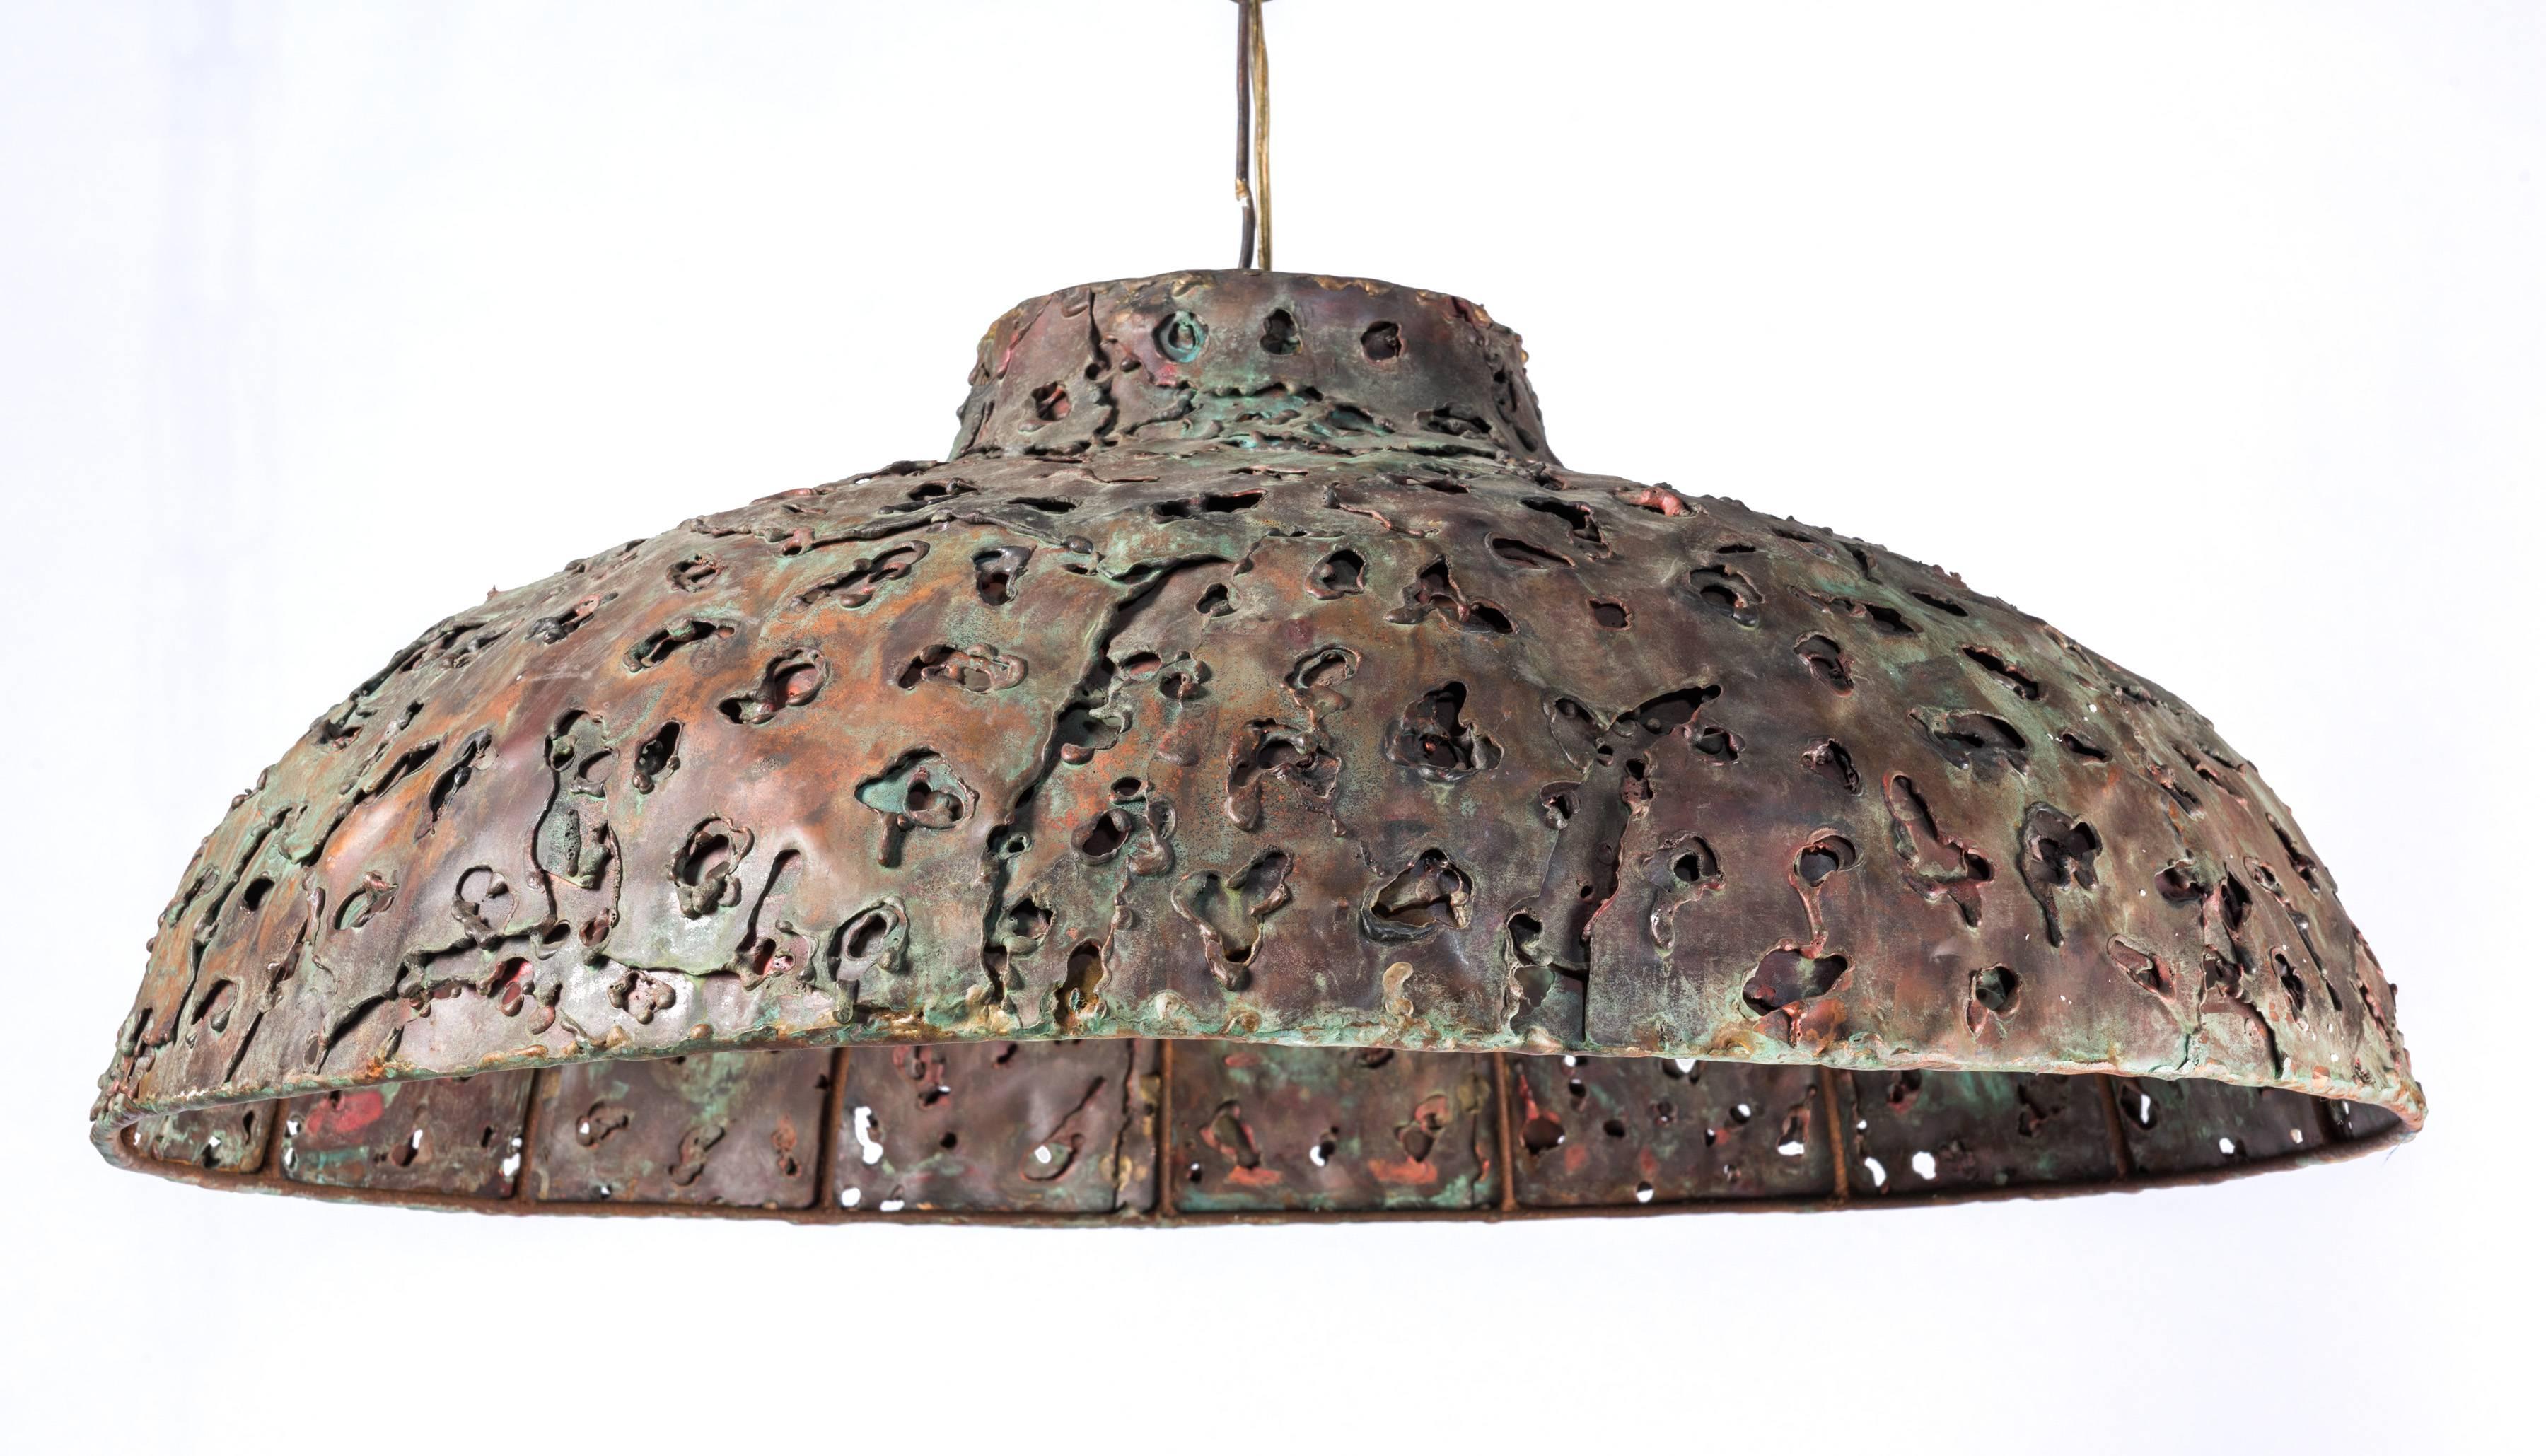 Custom and unique enameled steel and patinated copper Brutalist chandelier by American Studio Craft designer and artist Silas Seandel, New York, 1970s. With original mounting hardware and chain.
 